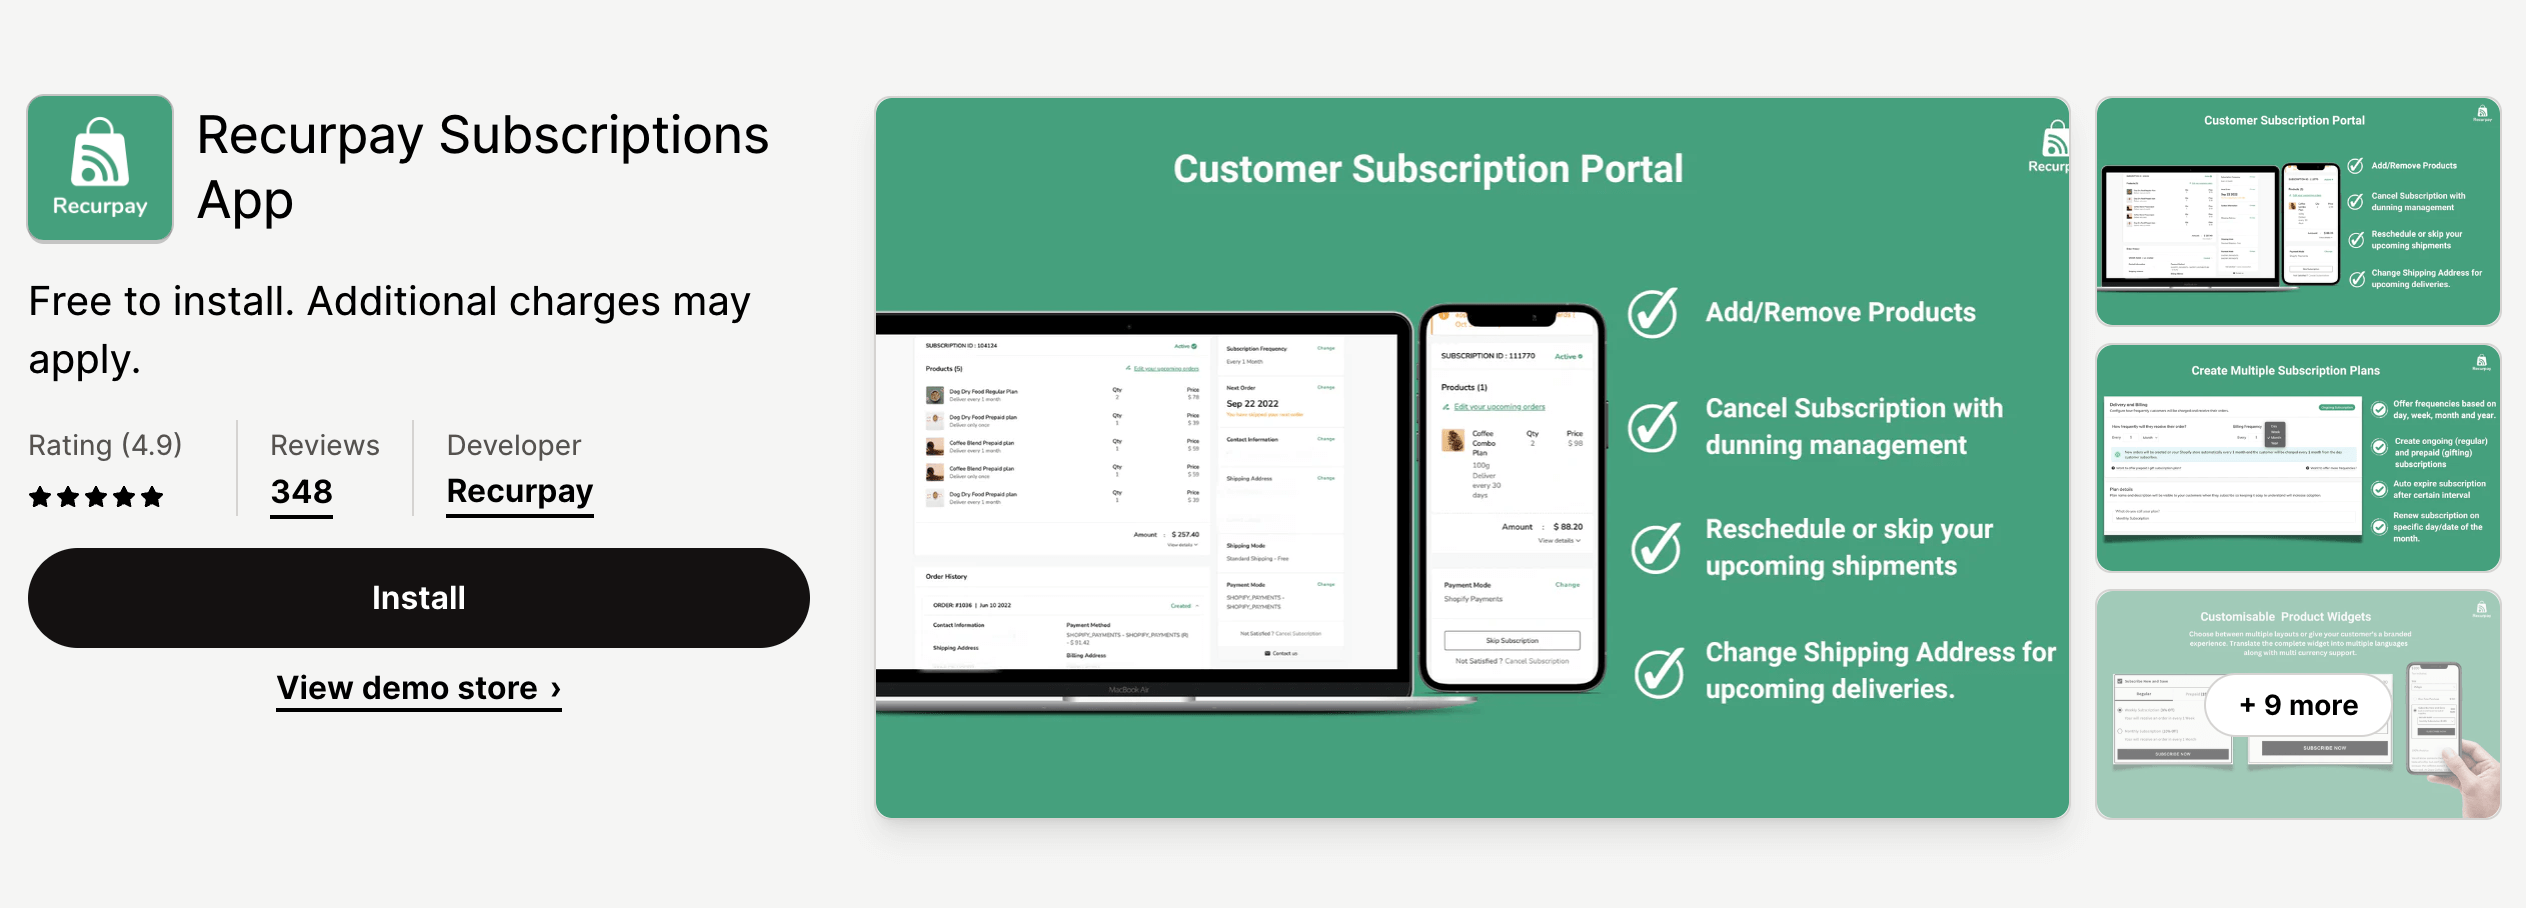 Recurpay Subscriptions